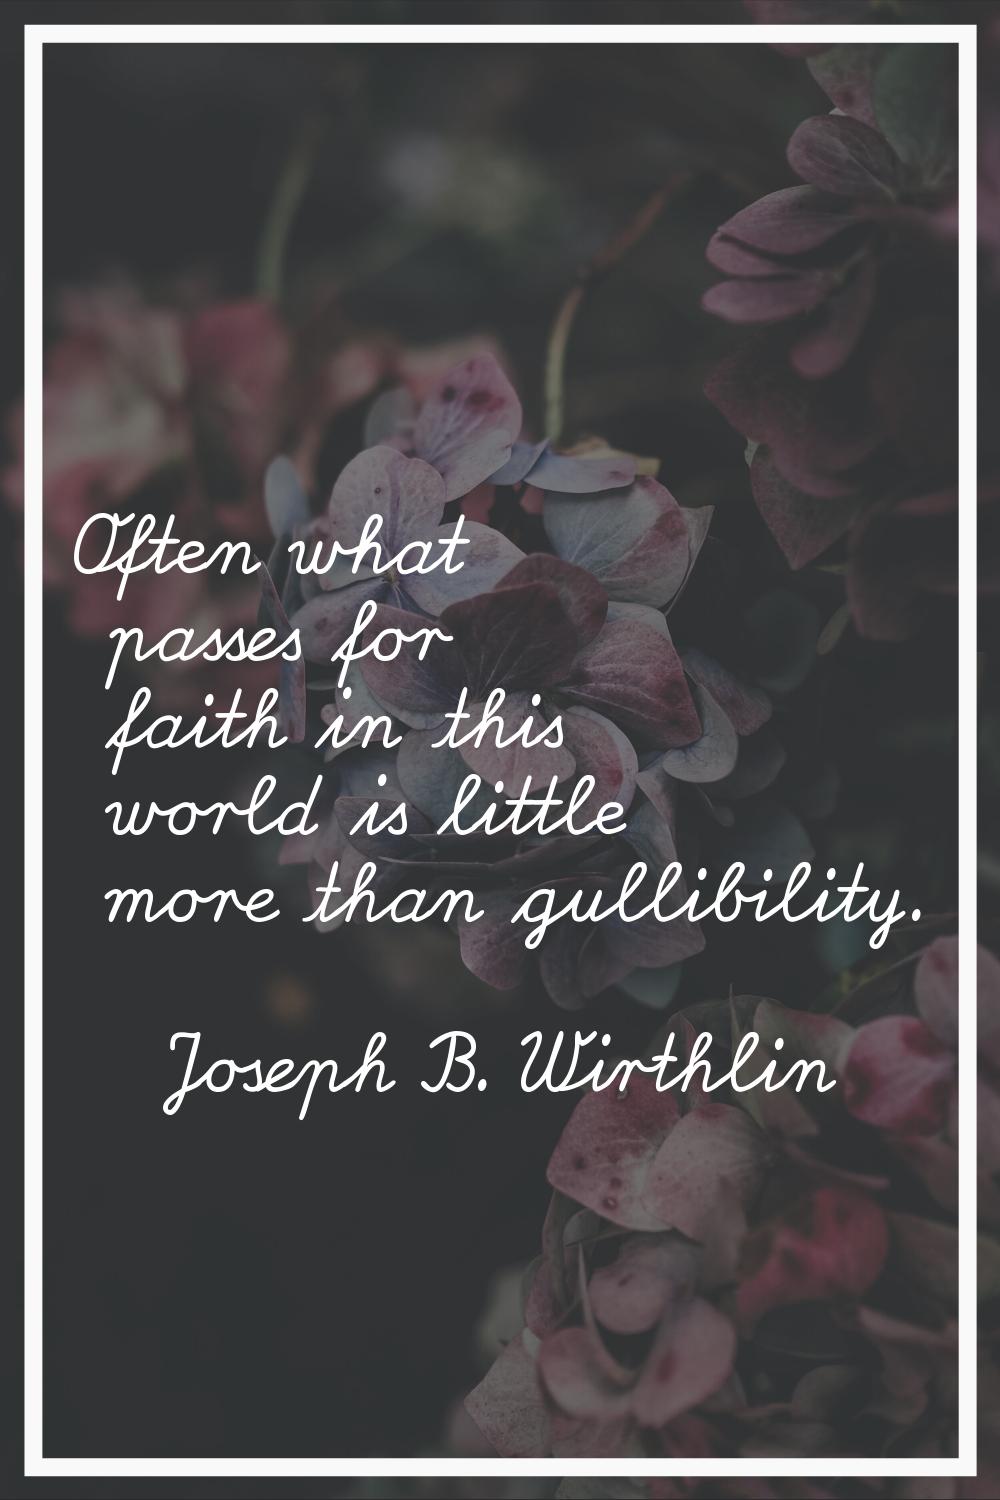 Often what passes for faith in this world is little more than gullibility.